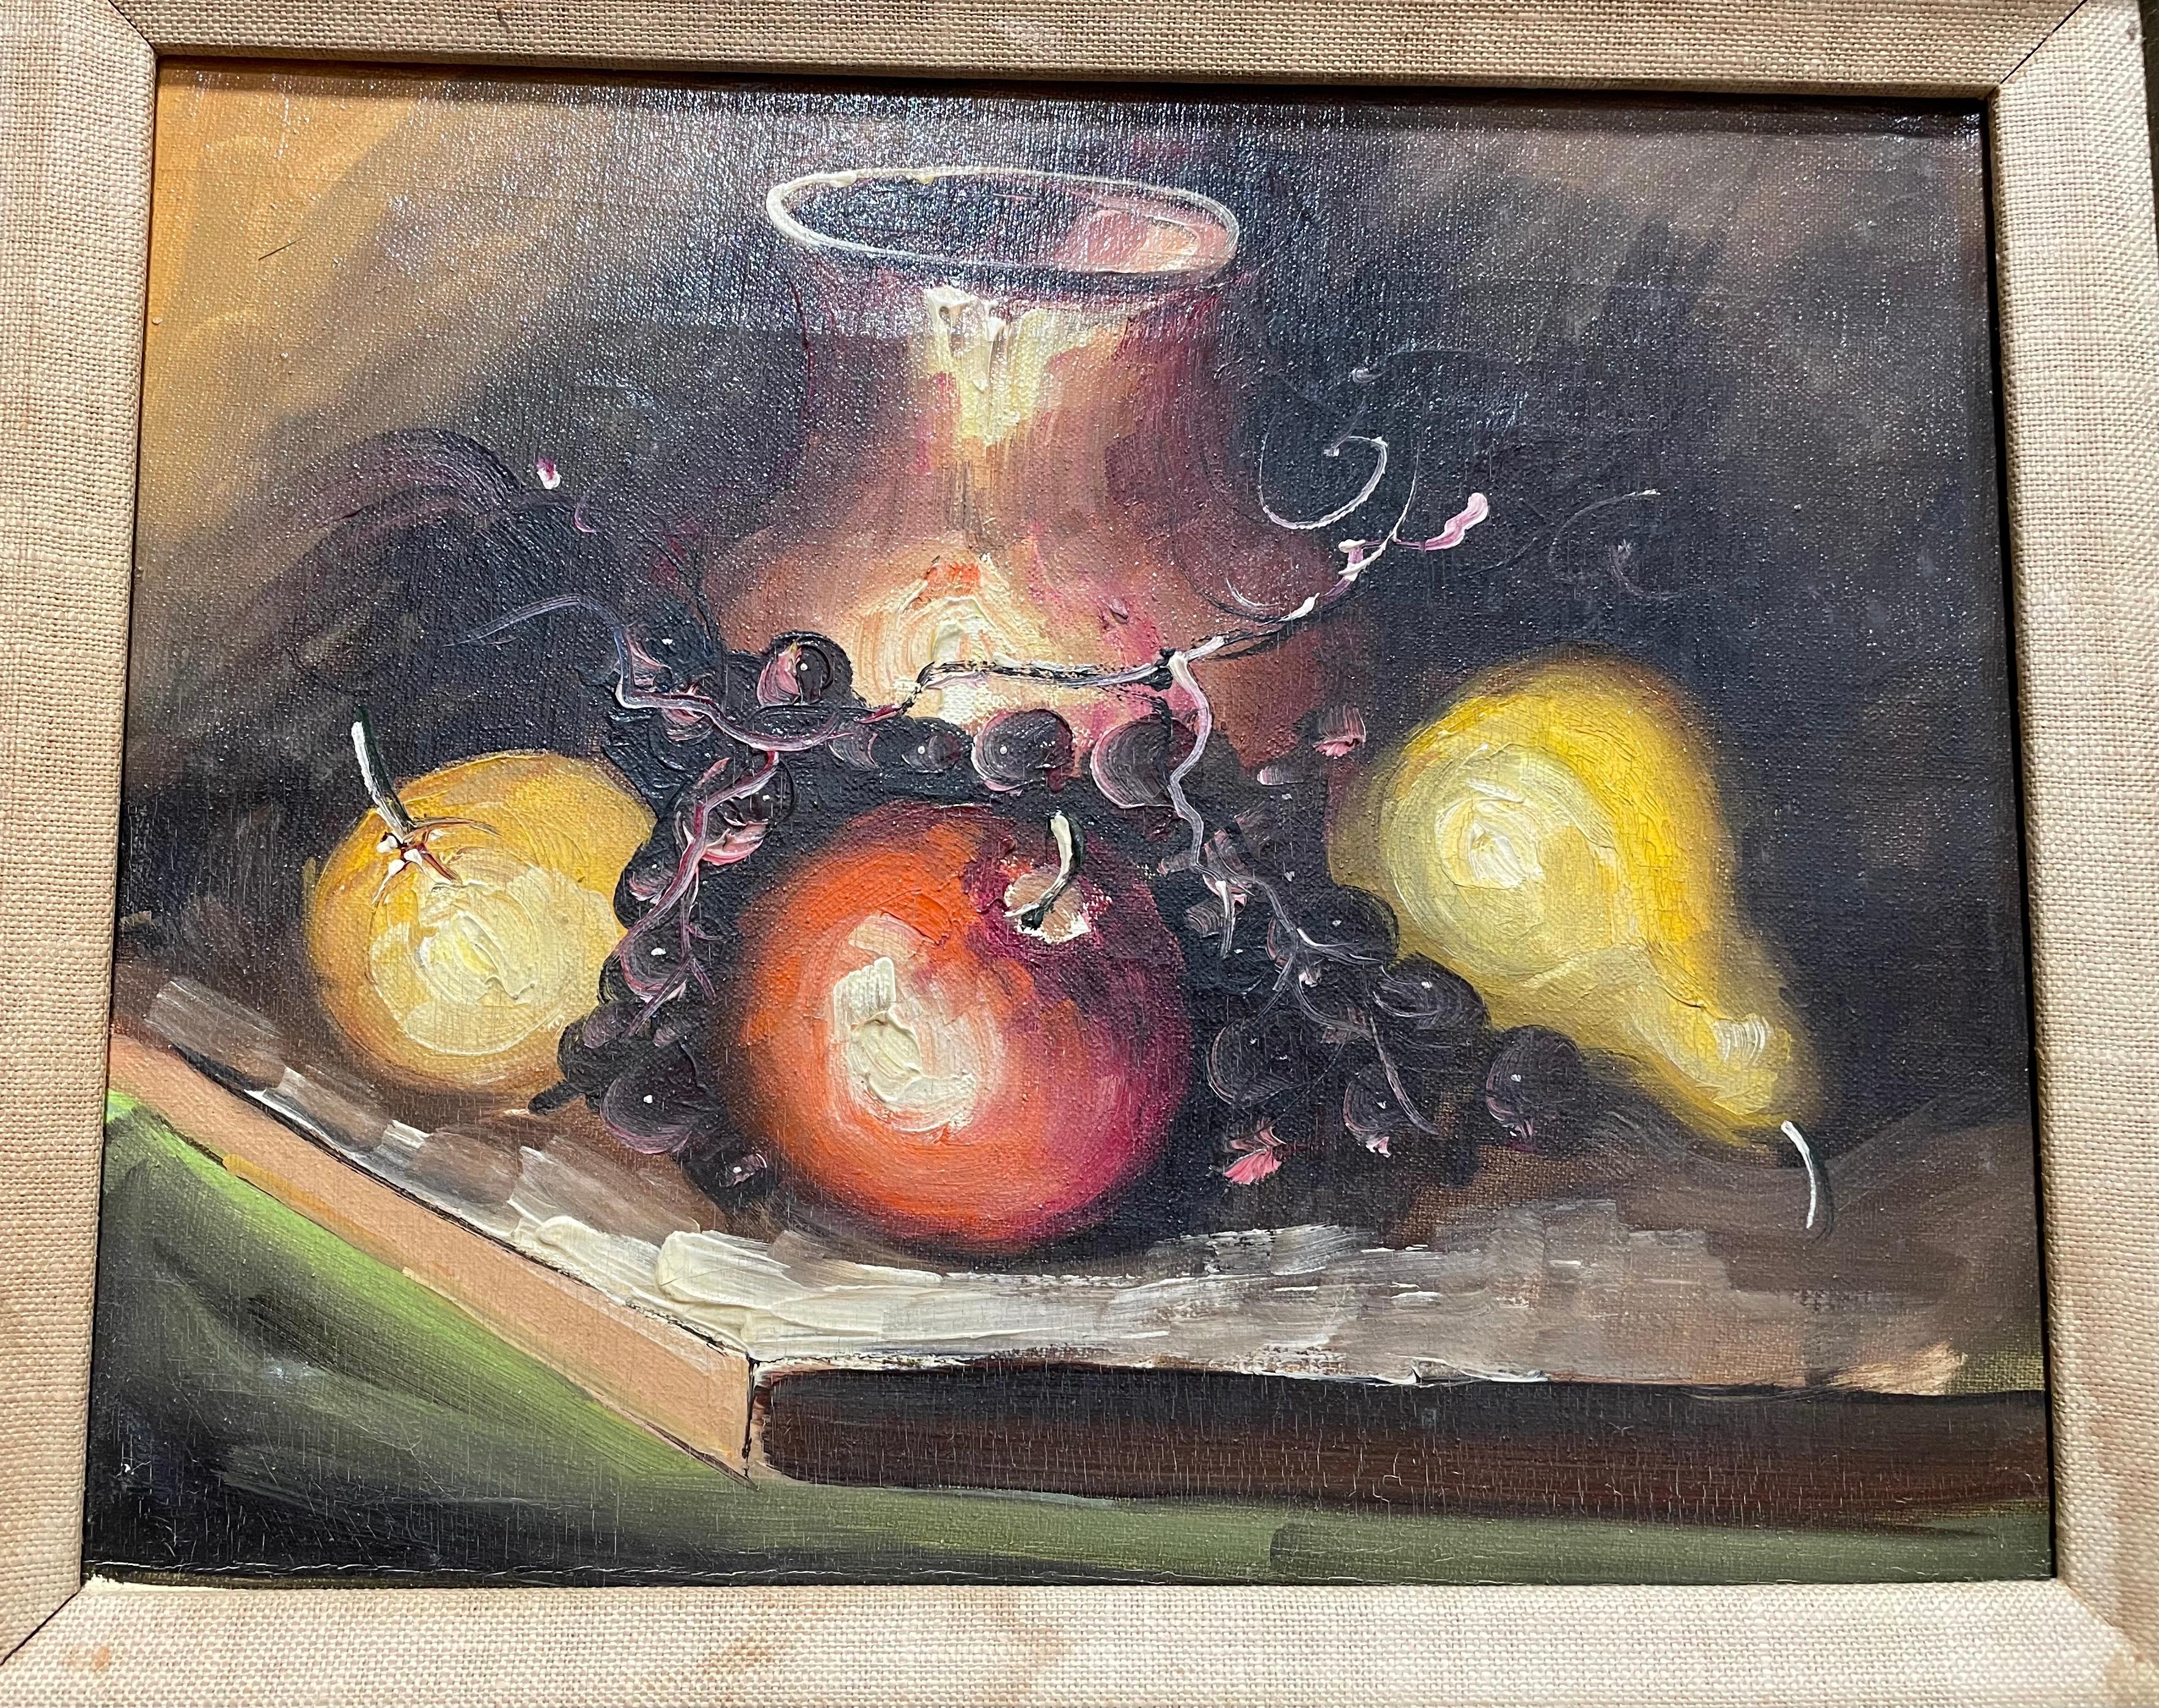 Vintage framed Still Life Oil Painting of Fruit with Pitcher. Framed in a lovely wooden frame. Ready to hang with wire along the back. 

French, circa 1920.

Size of frame: 16 x 18 inches; 2